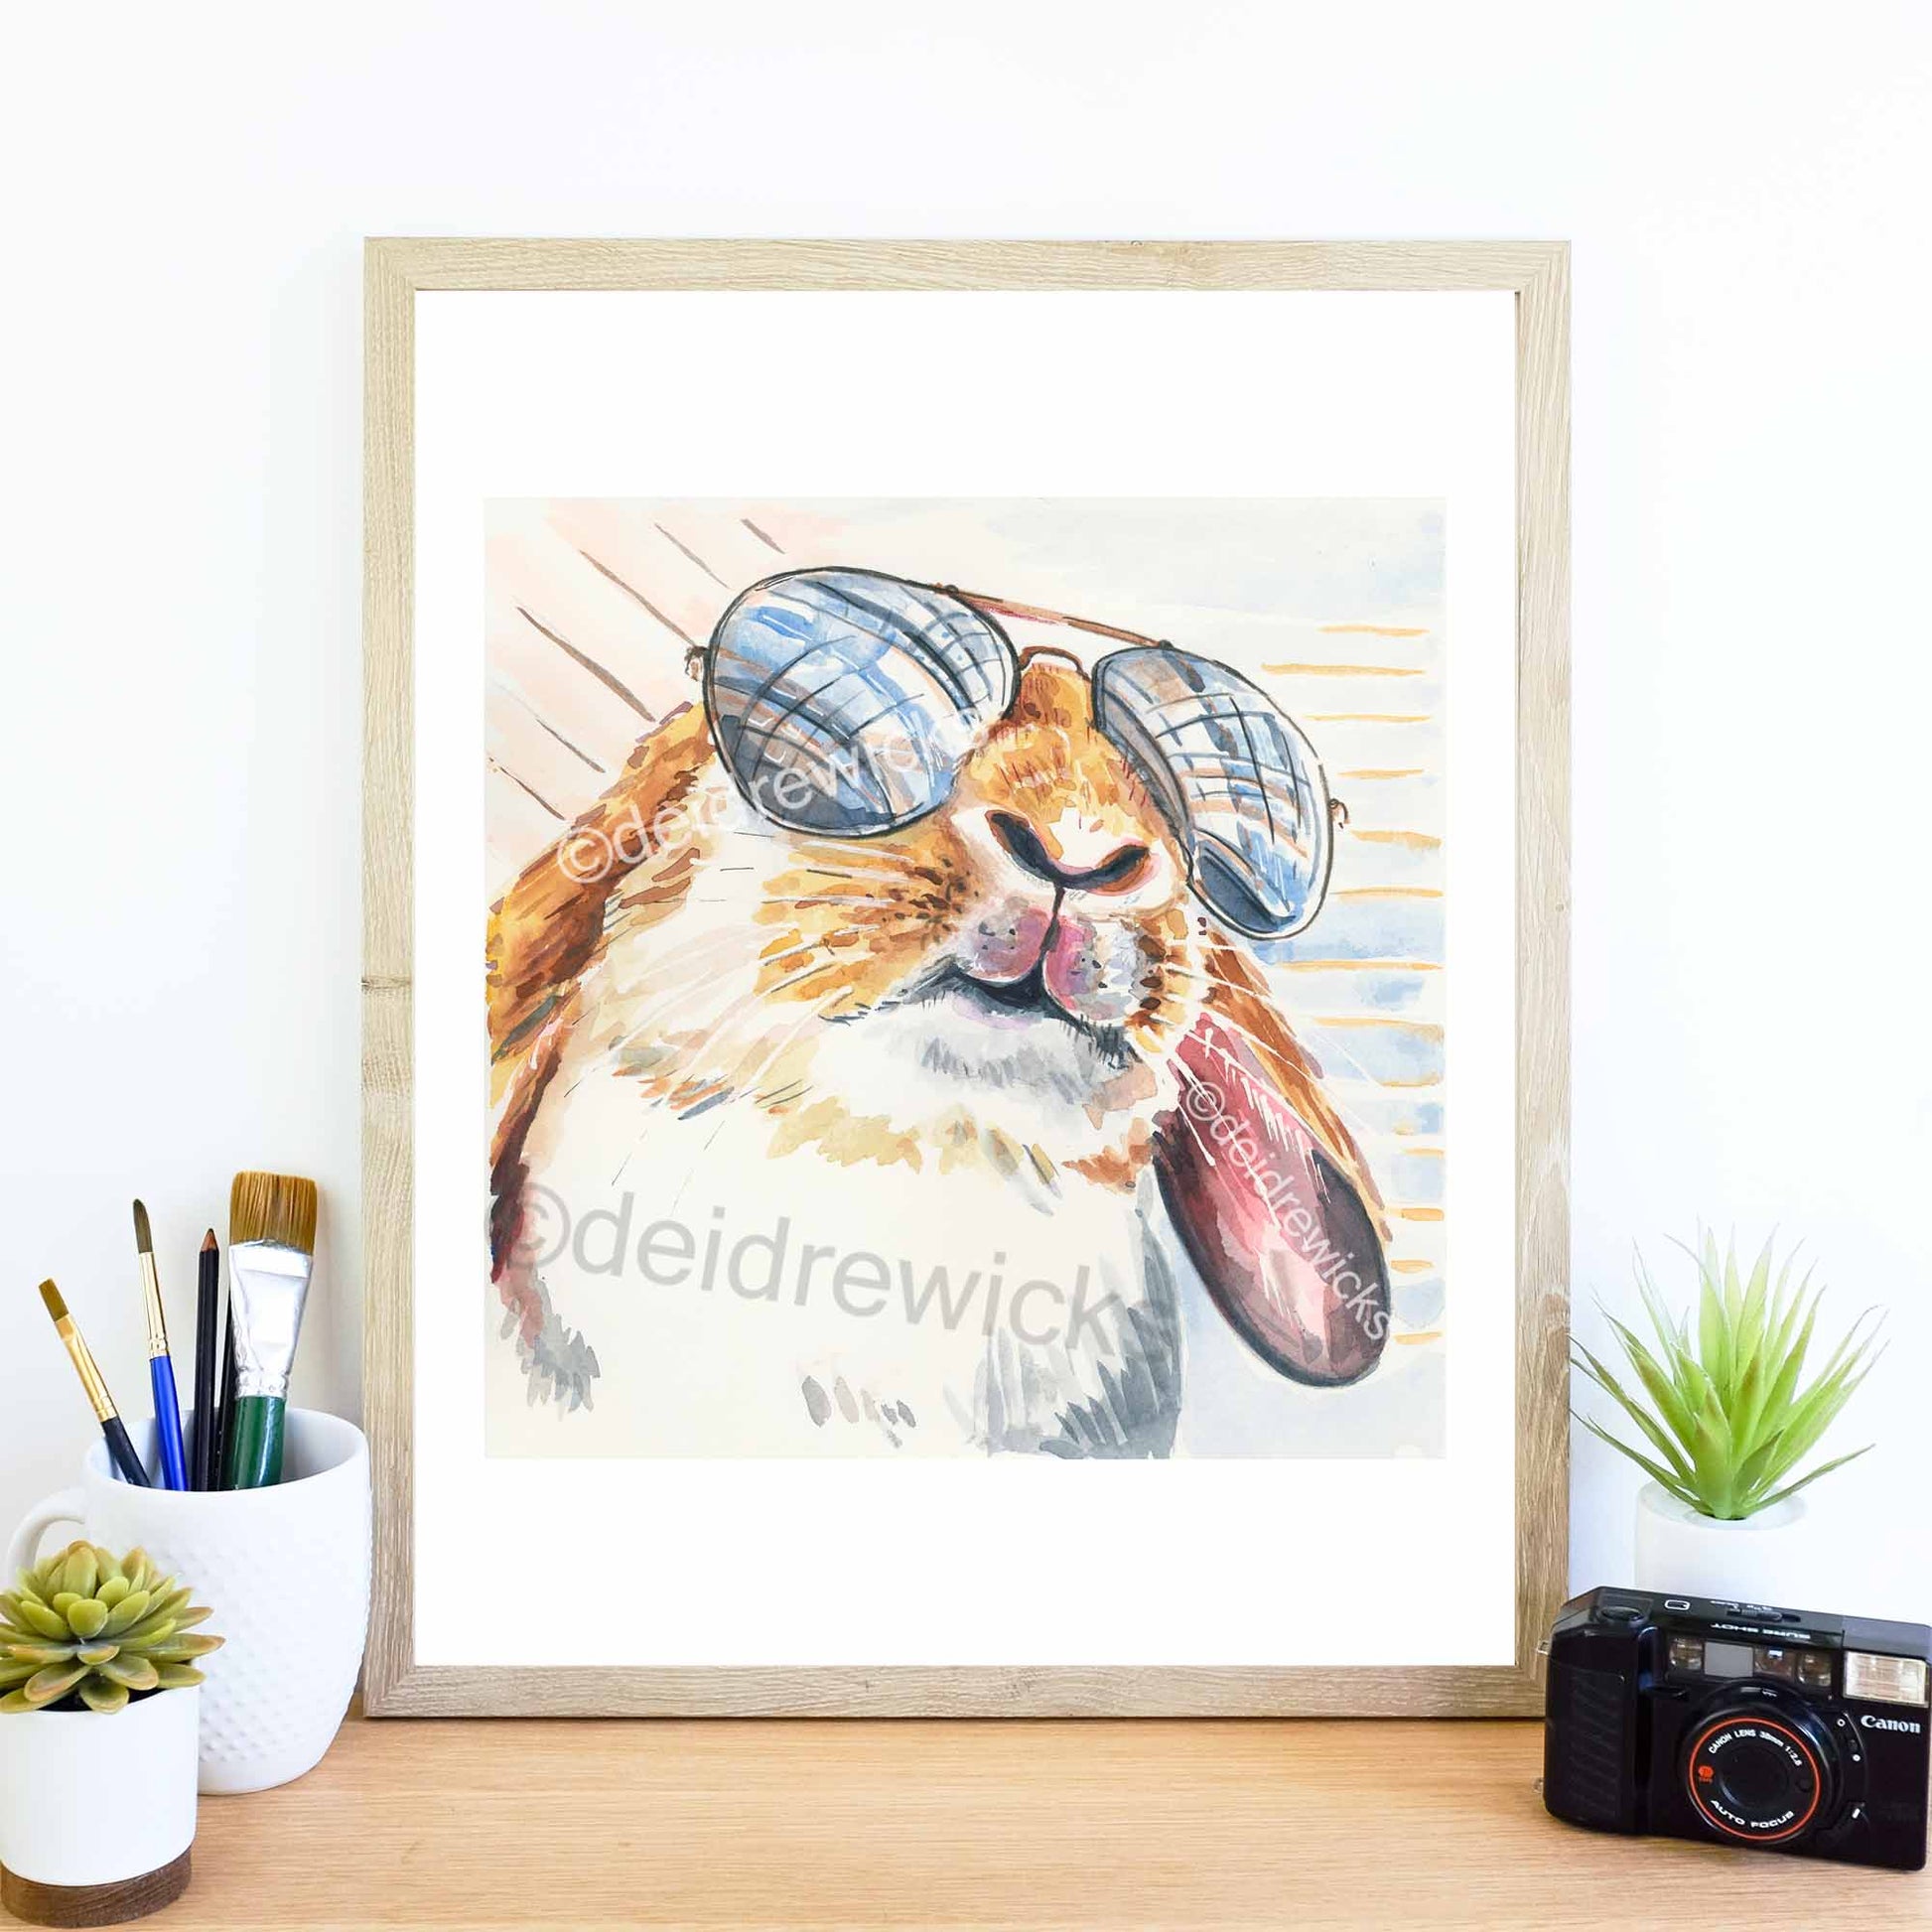 Example of how to frame a rabbit watercolour painting by Deidre Wicks